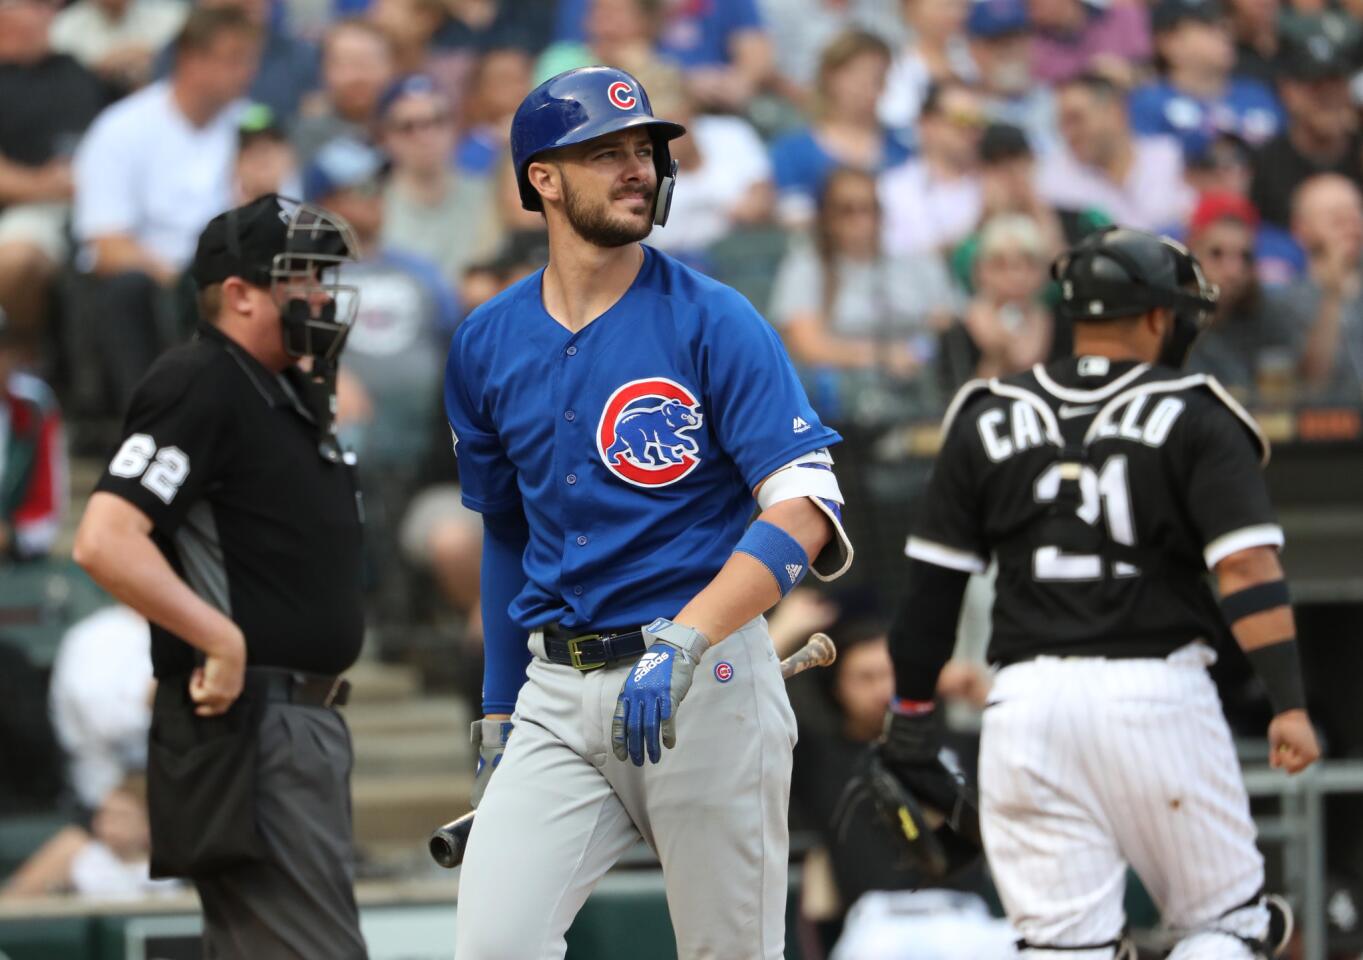 Cubs third baseman Kris Bryant heads to the dugout after striking out to end the top of the fifth inning against the White Sox at Guaranteed Rate Field on Sept. 21, 2018.